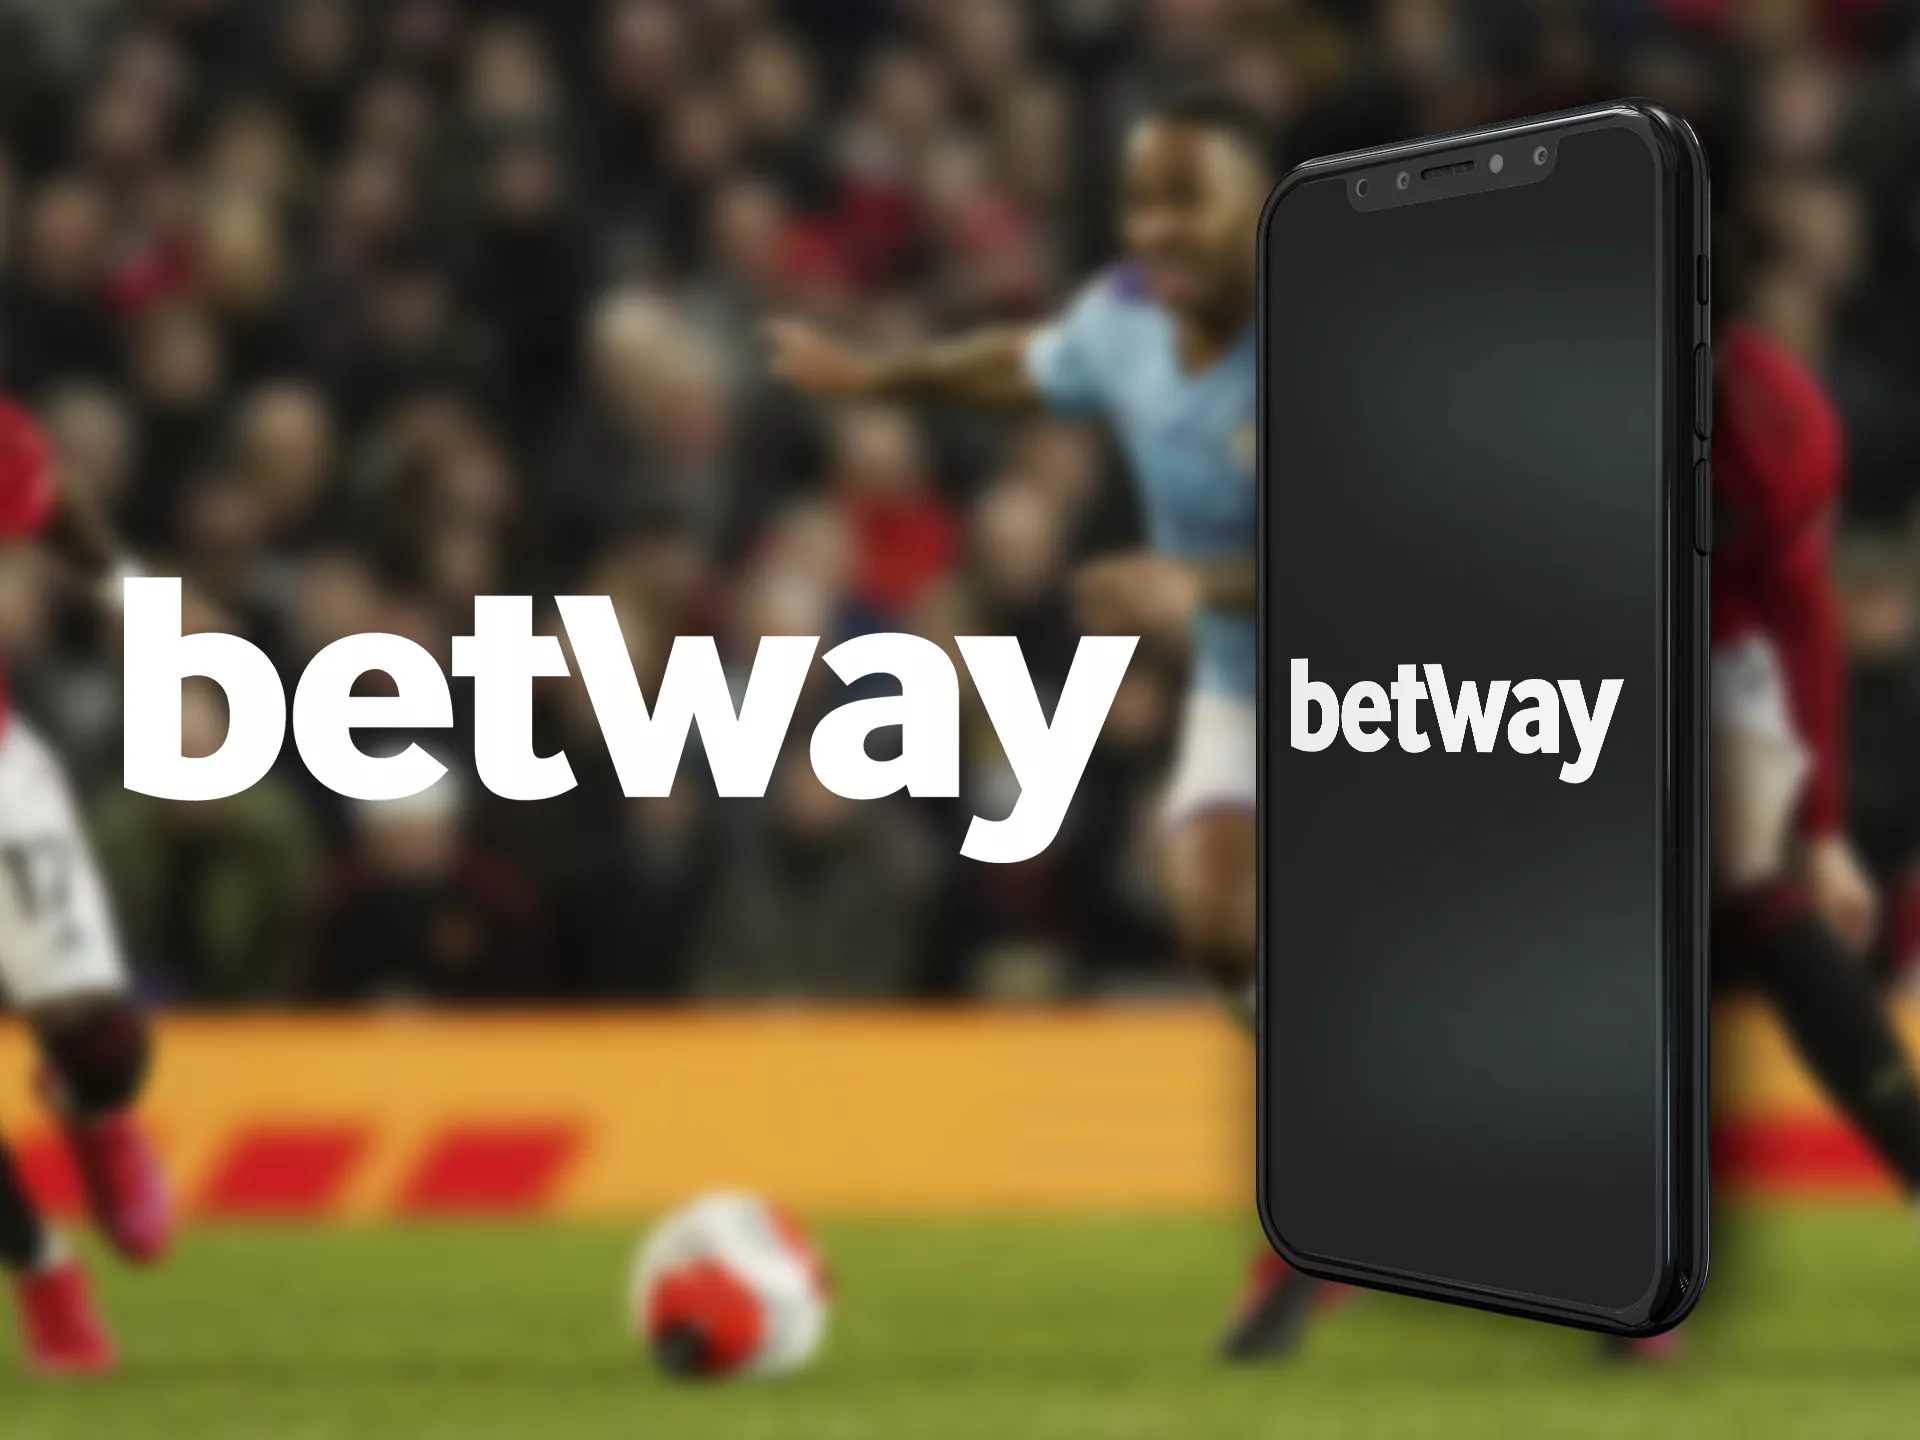 betway is a best soccer betting company.